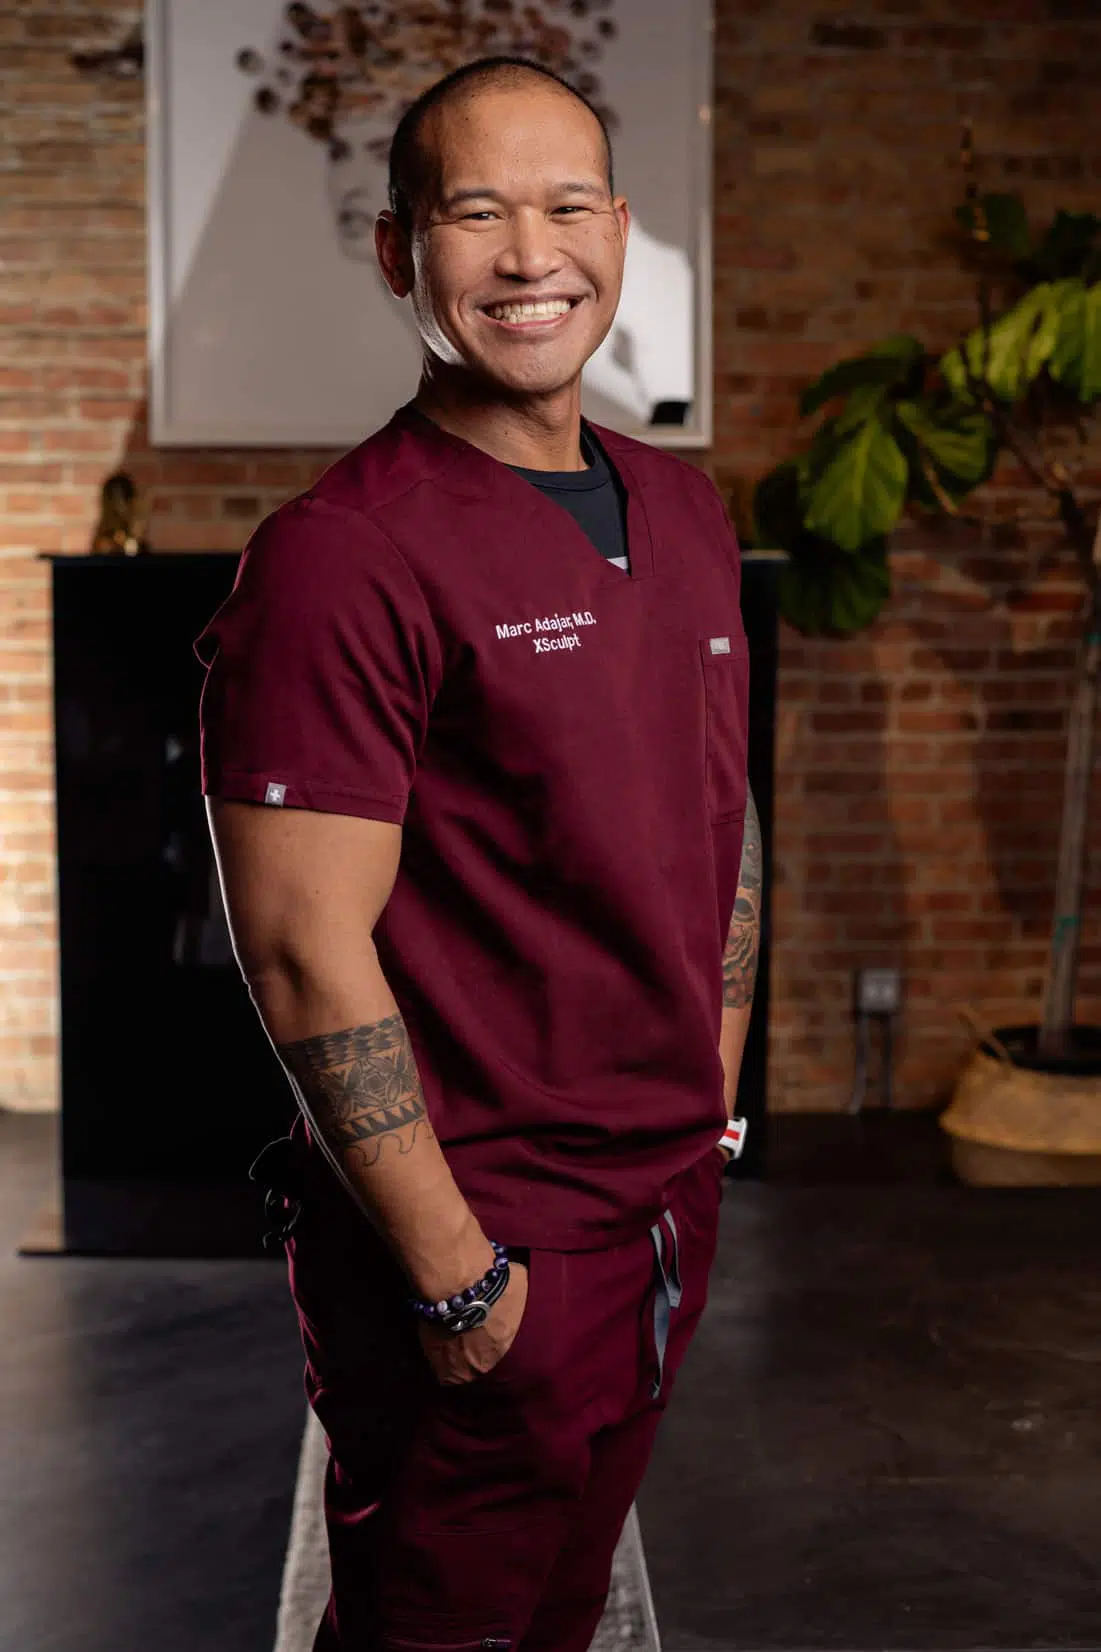 Dr. Marc Adajar, a man in scrubs, smiling in front of a brick wall.